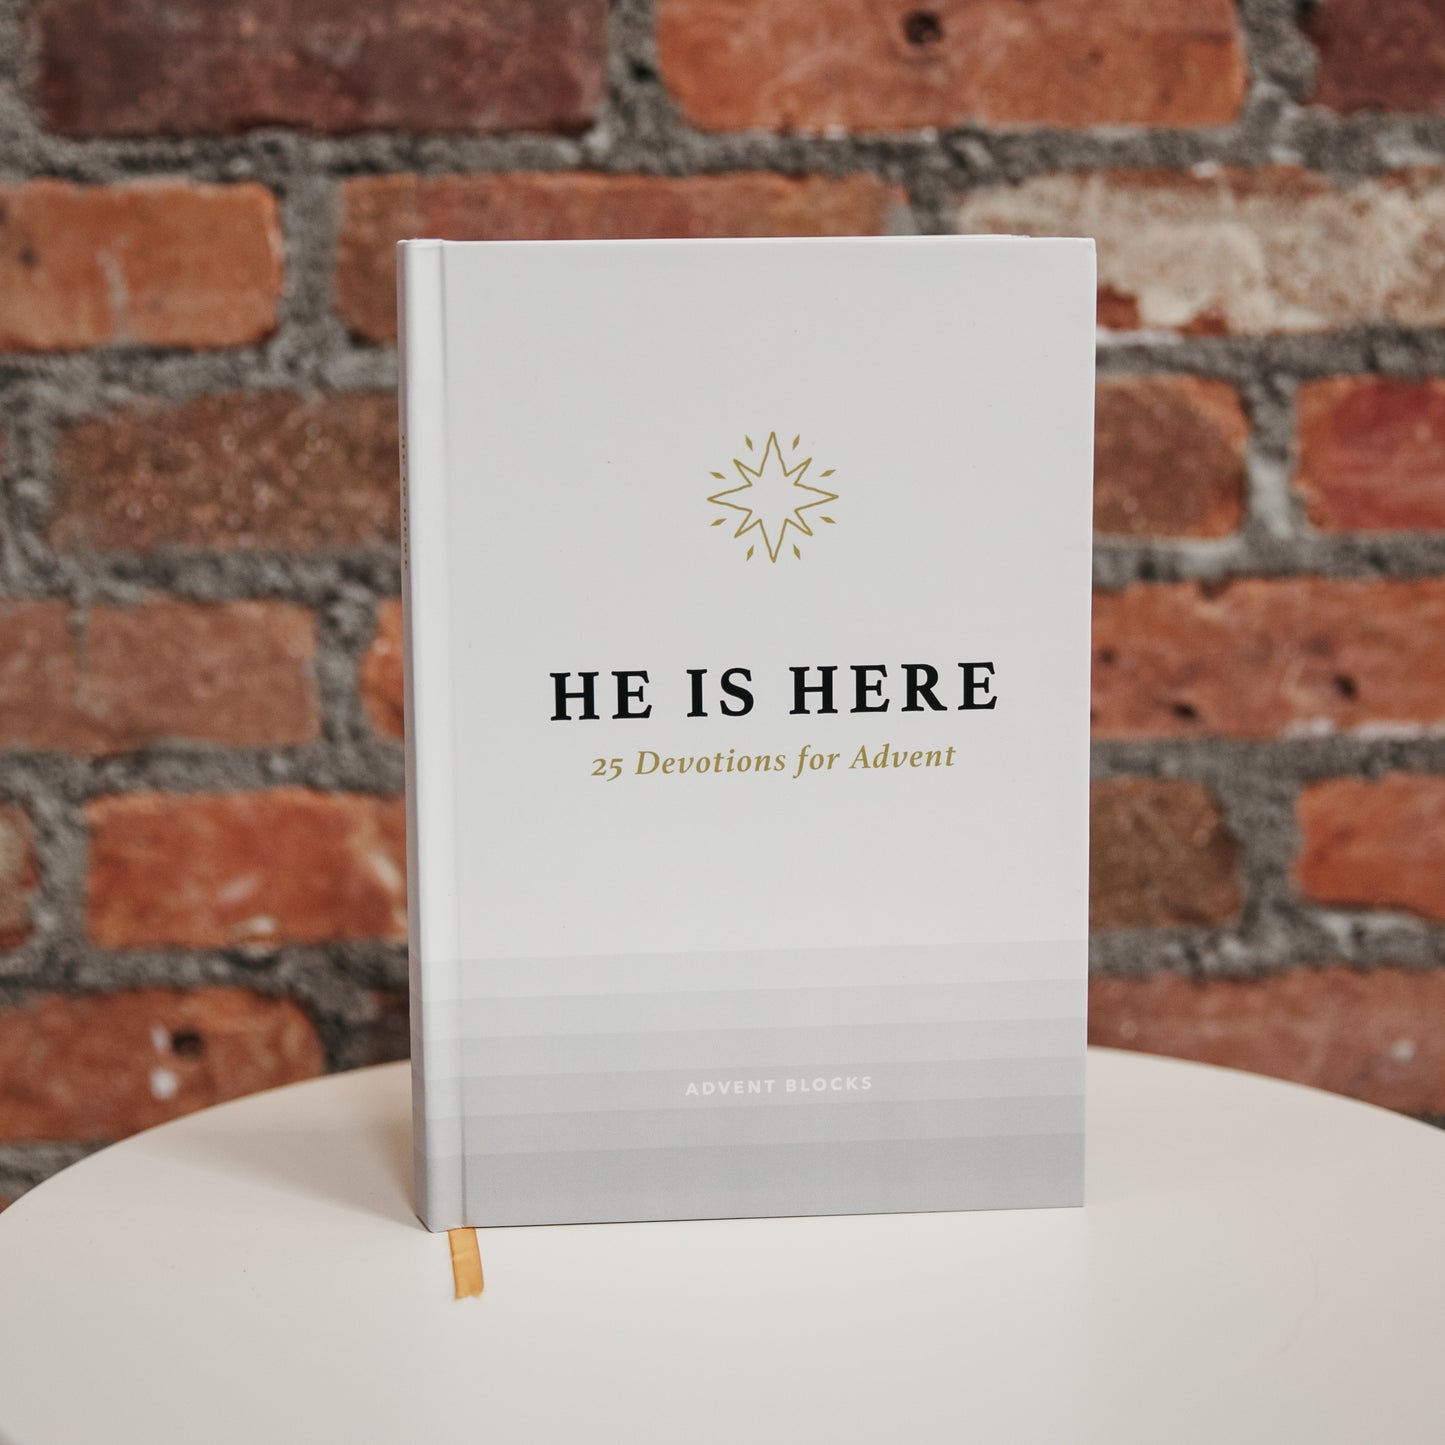 He Is Here: Adult Devotional Guide